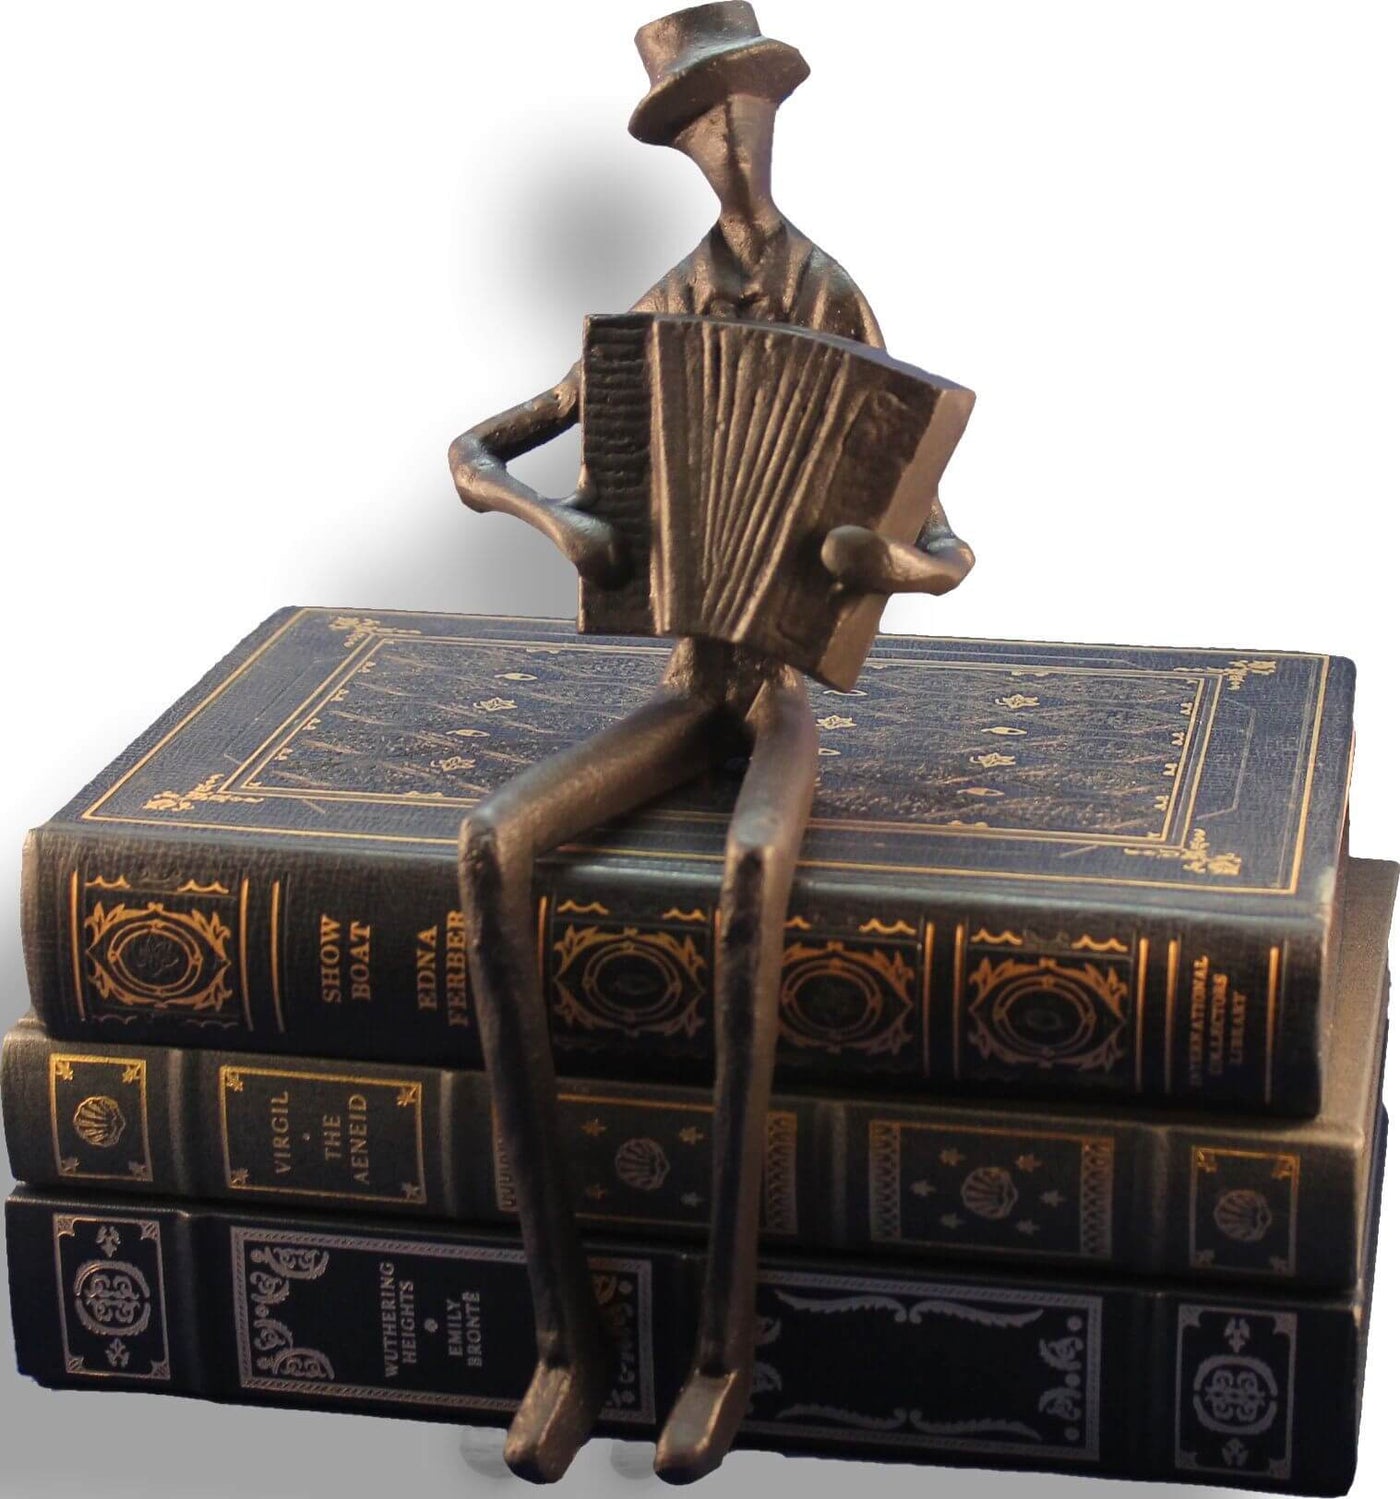 Accordion Jazz Musician Figurine Sculpture - Cast Iron - Blues Player in partnership with Rustic Deco Incorporated